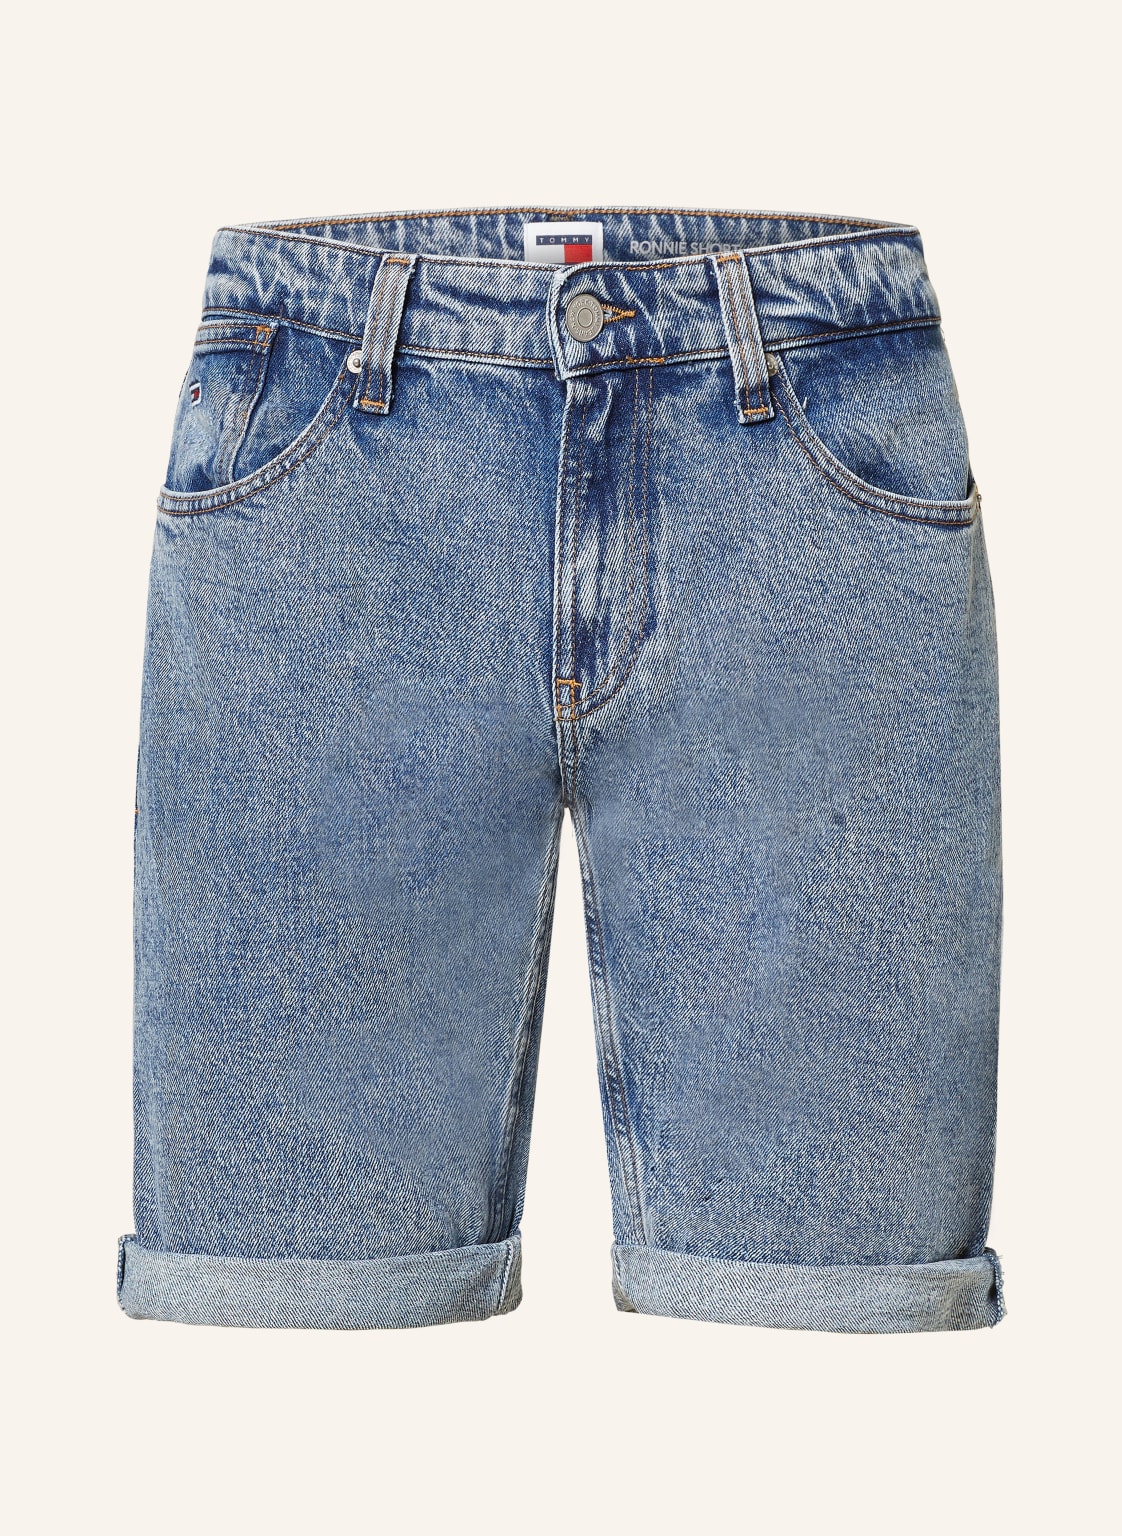 Tommy Jeans Jeansshorts Ronnie Relaxed Fit blau von Tommy Jeans